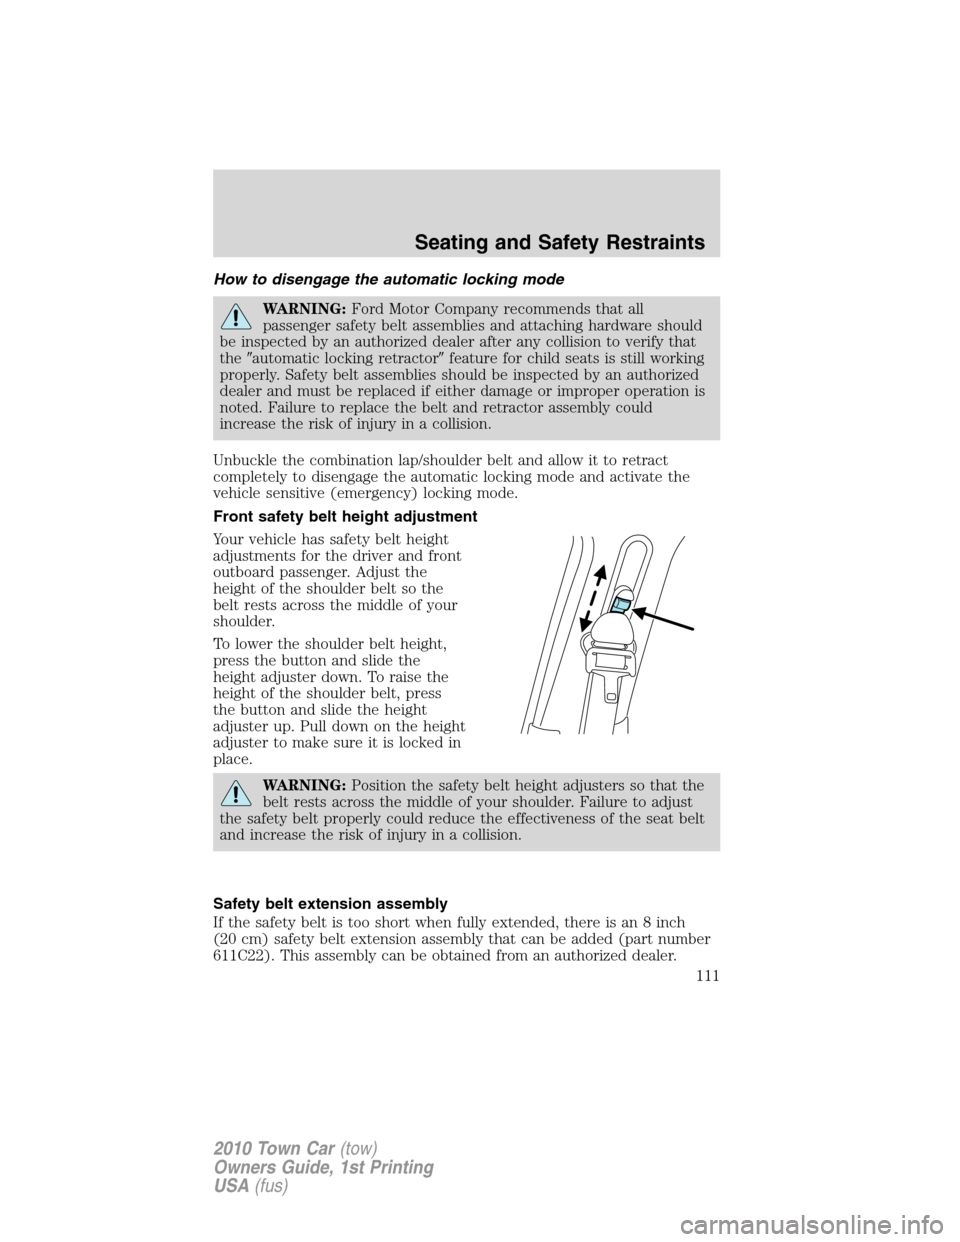 LINCOLN TOWN CAR 2010  Owners Manual How to disengage the automatic locking mode
WARNING:Ford Motor Company recommends that all
passenger safety belt assemblies and attaching hardware should
be inspected by an authorized dealer after any